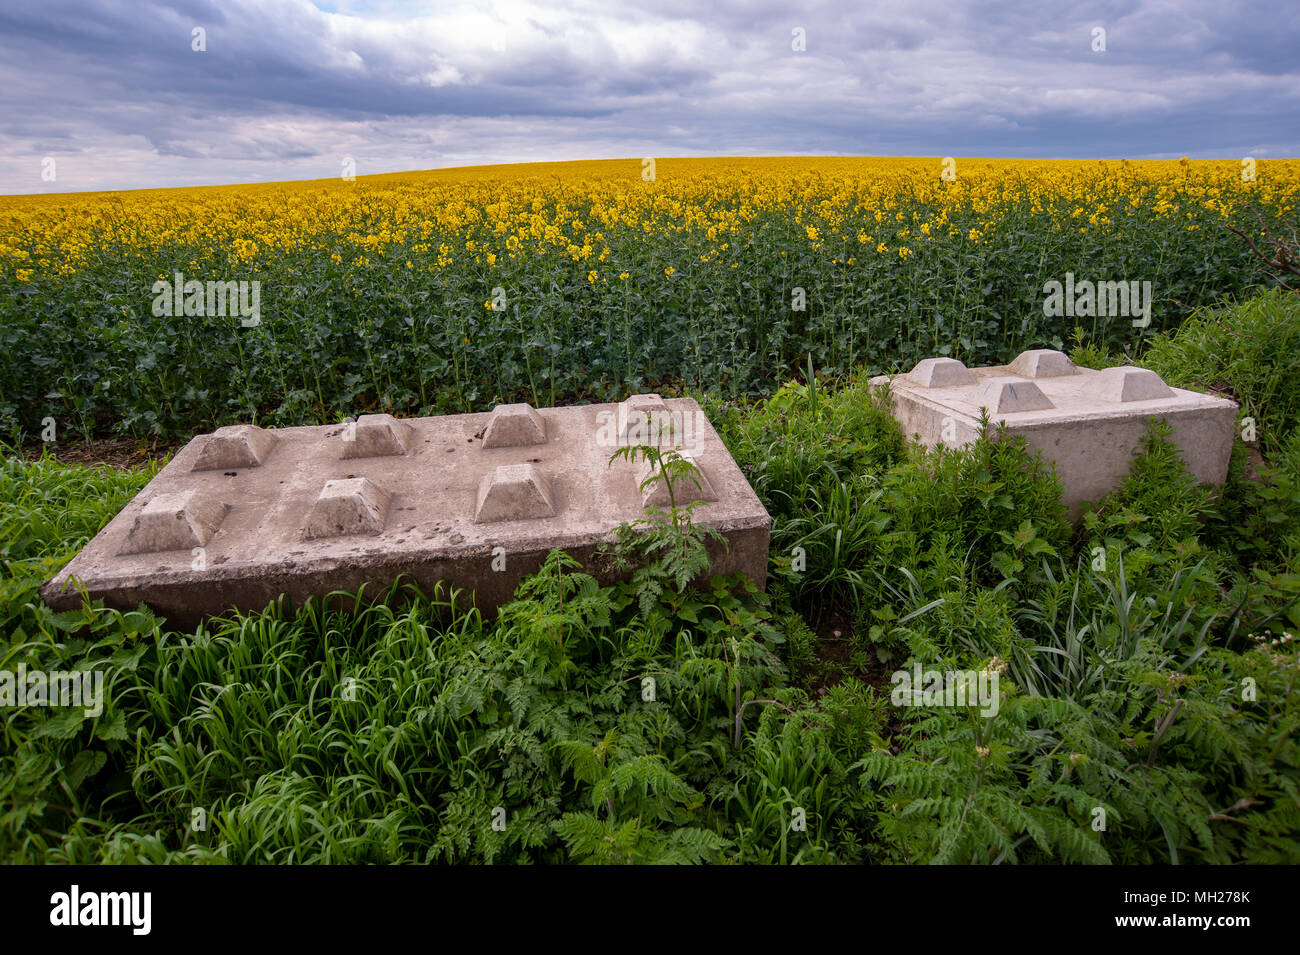 Block on the landscape, large concrete blocks looking like giant lego bricks, used by farmers to prevent unauthorised access to farmland by poachers Stock Photo